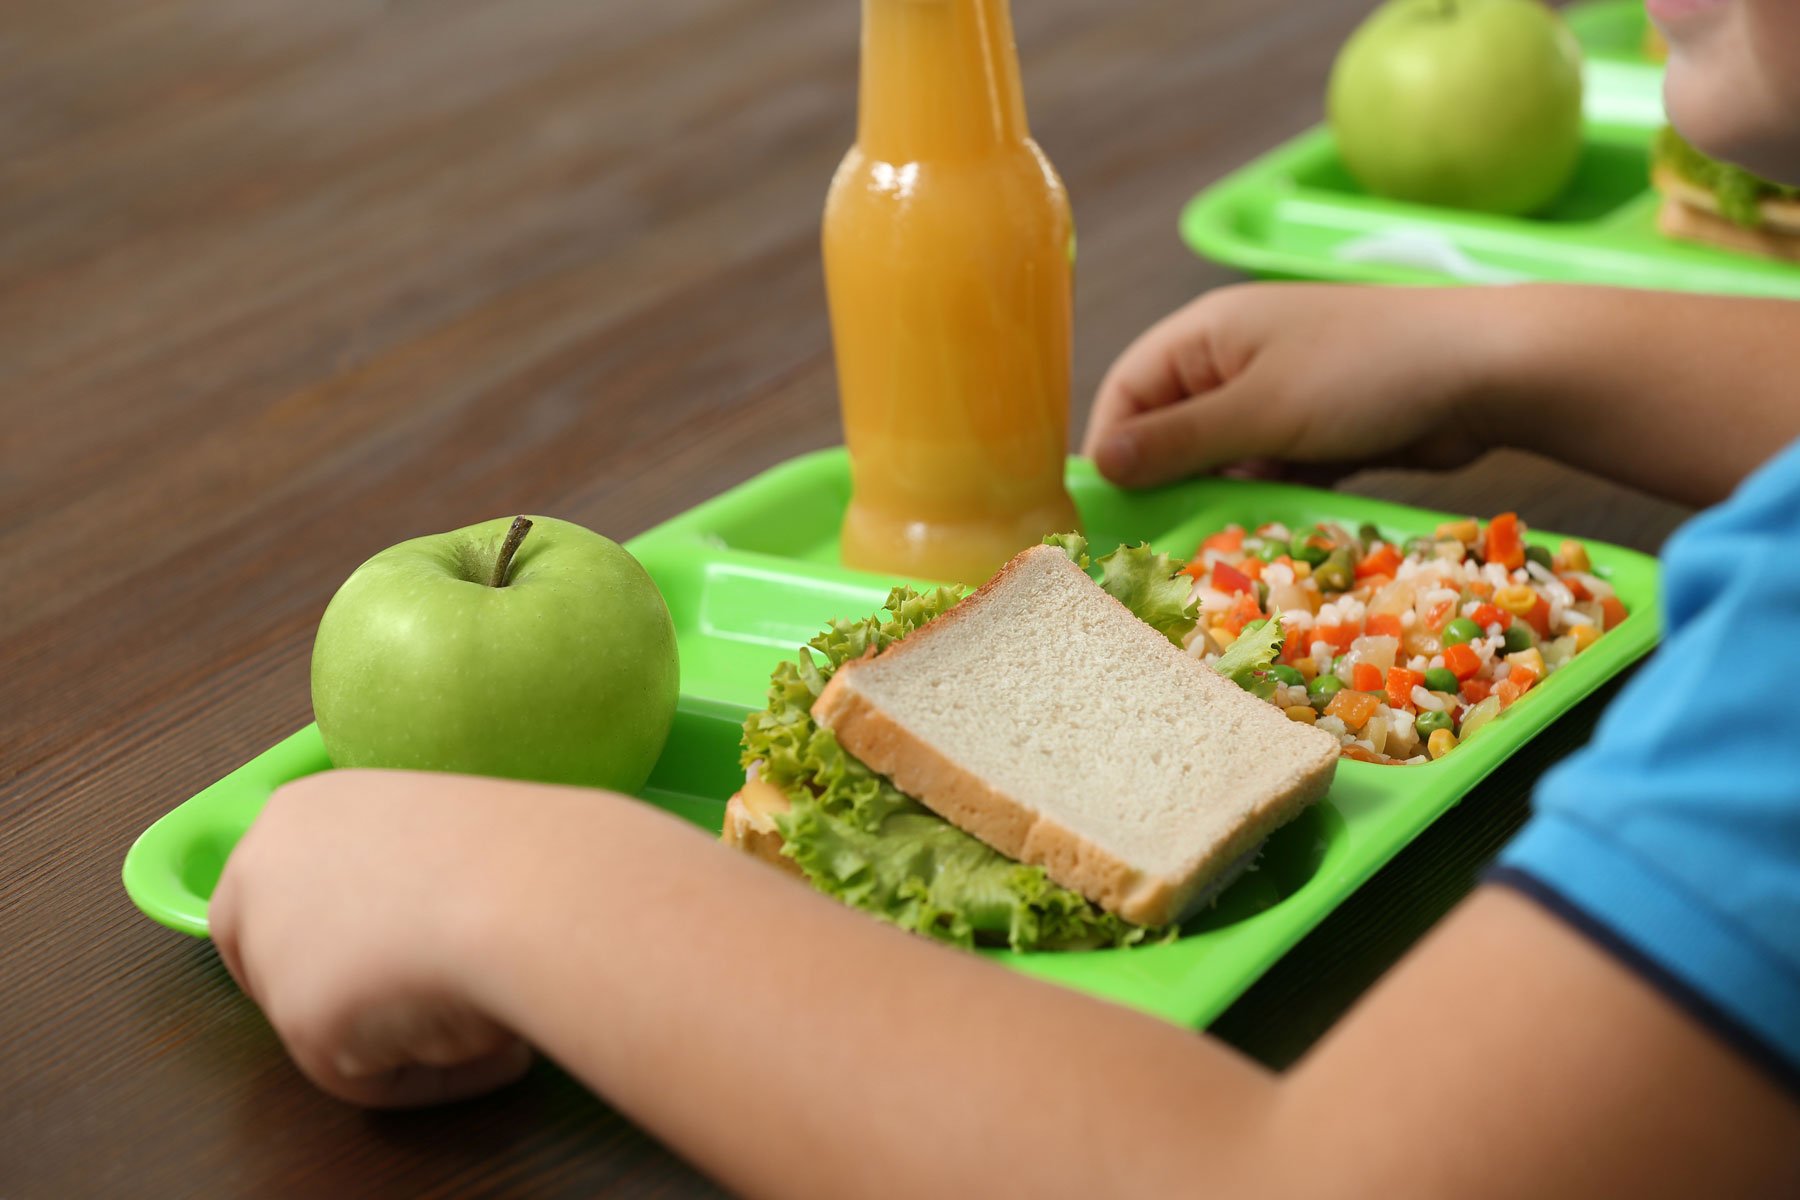 How healthy are school lunches?